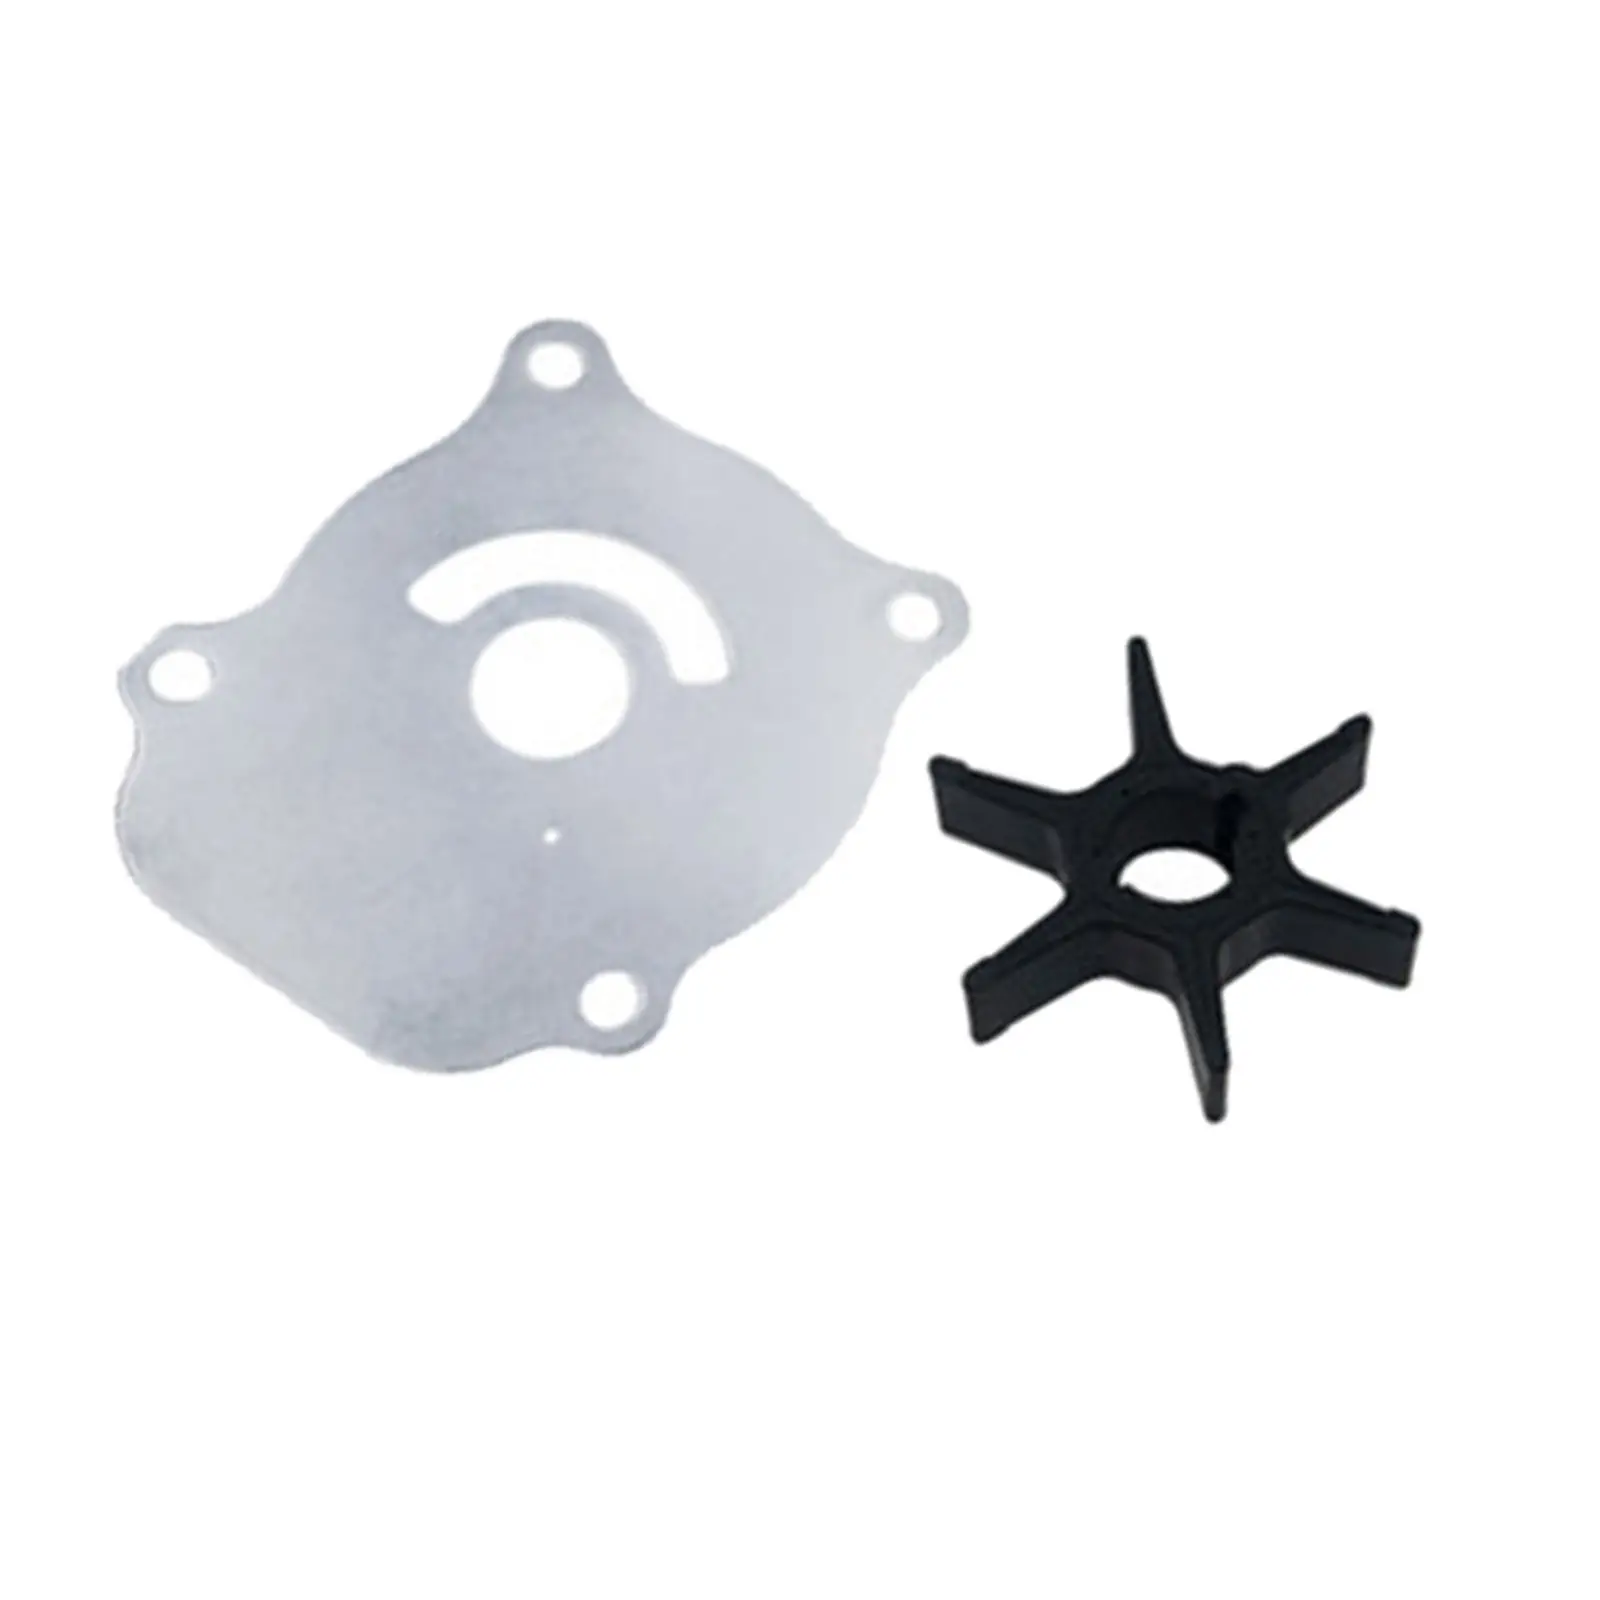 Water Pump Impeller Service Set 17400-88L00 fits for Suzuki Outboards, 40, 50, 60 HP, Easy to Install